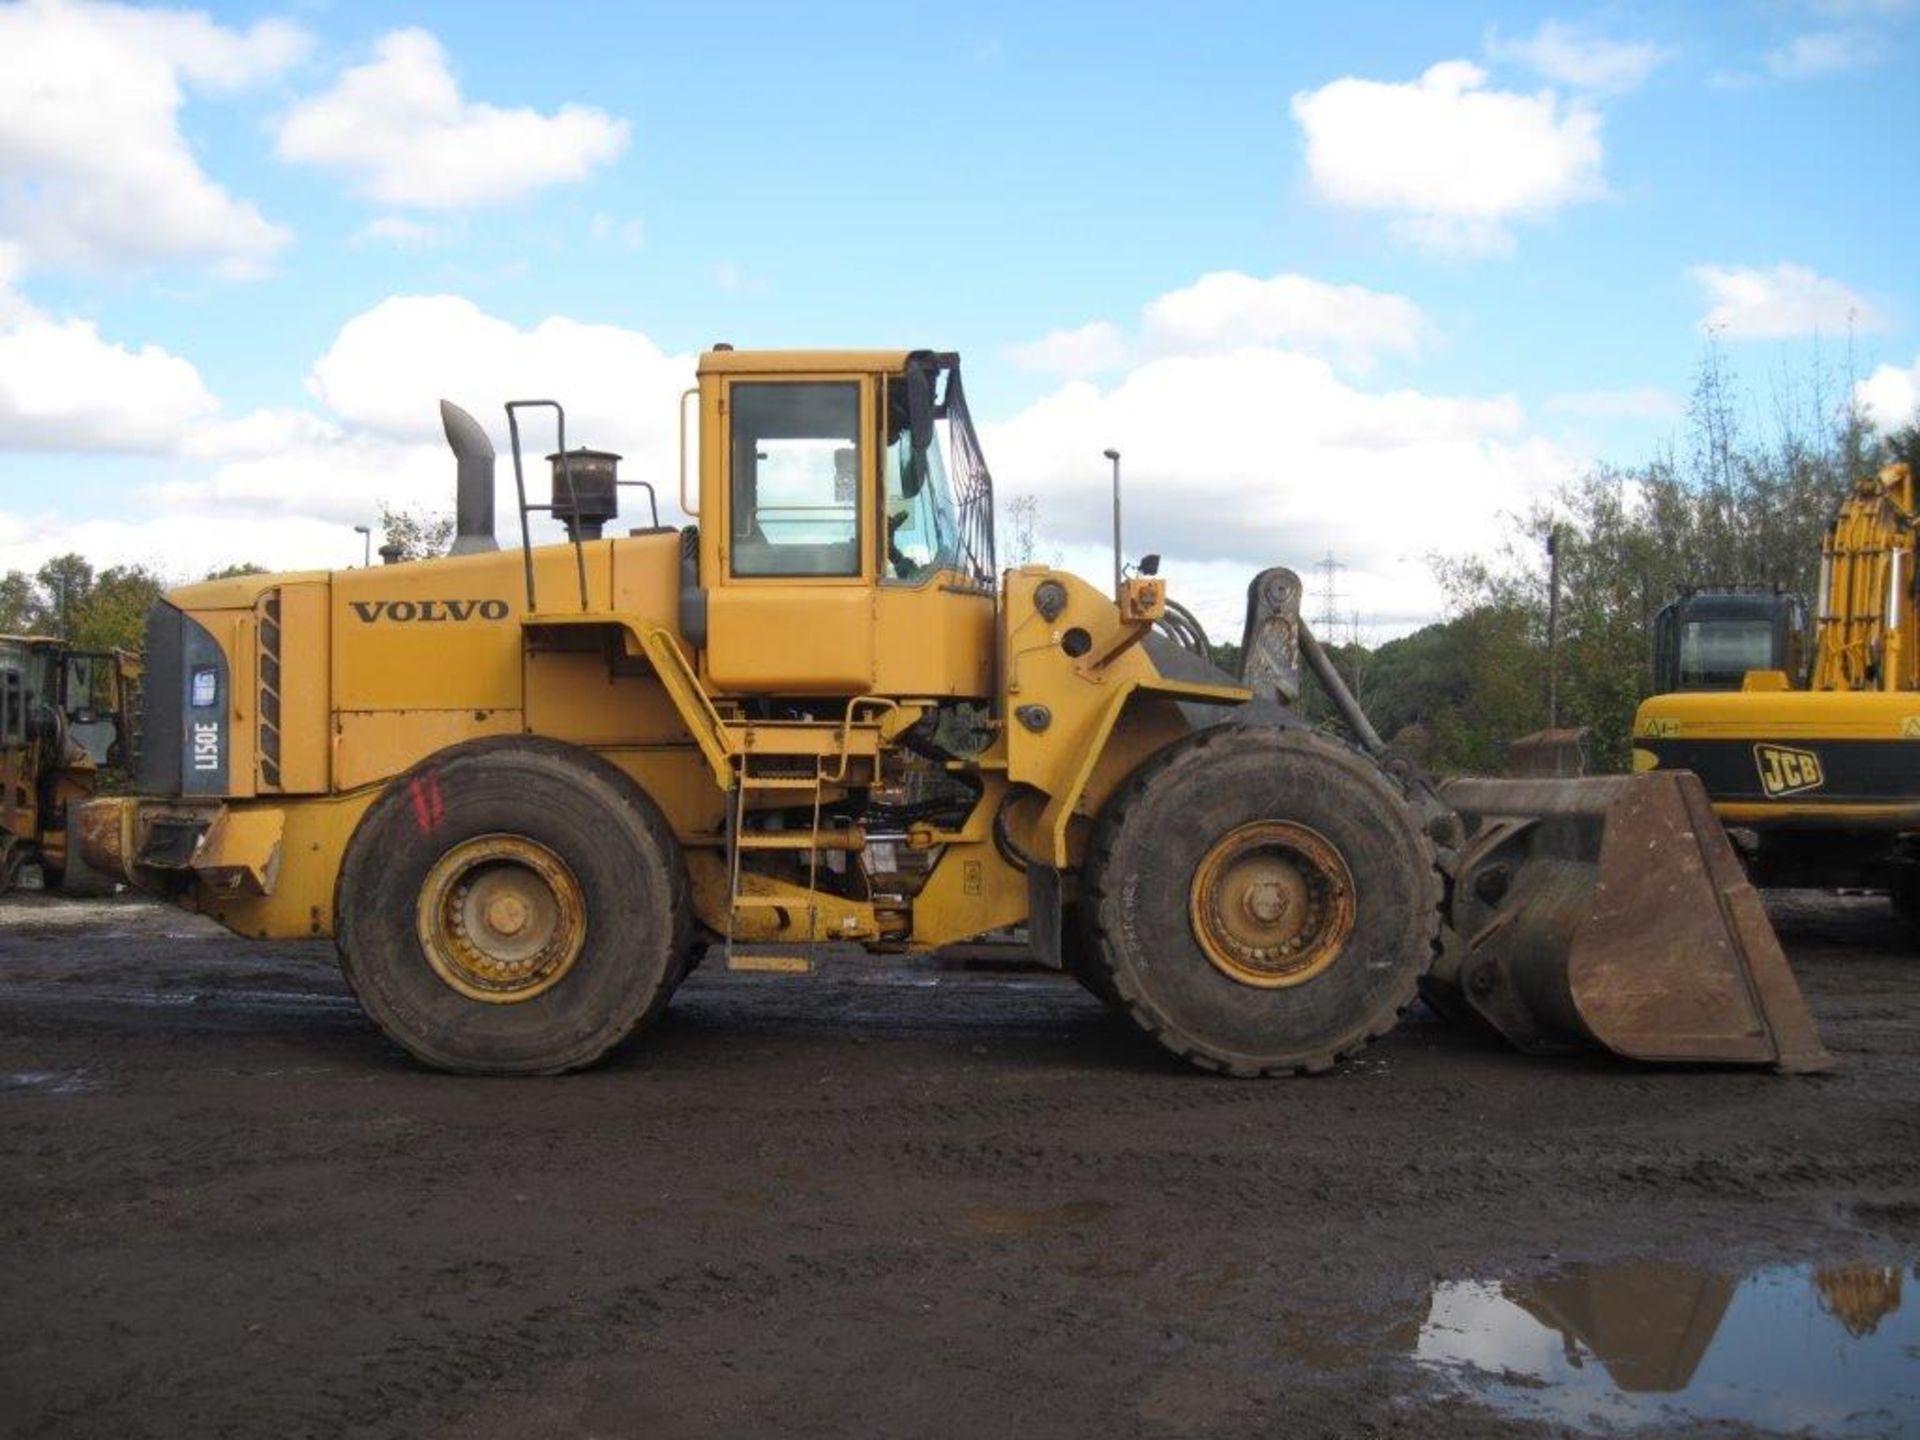 Volvo L150e Loading Shovel 2005, very good condition, original paint and well maintained